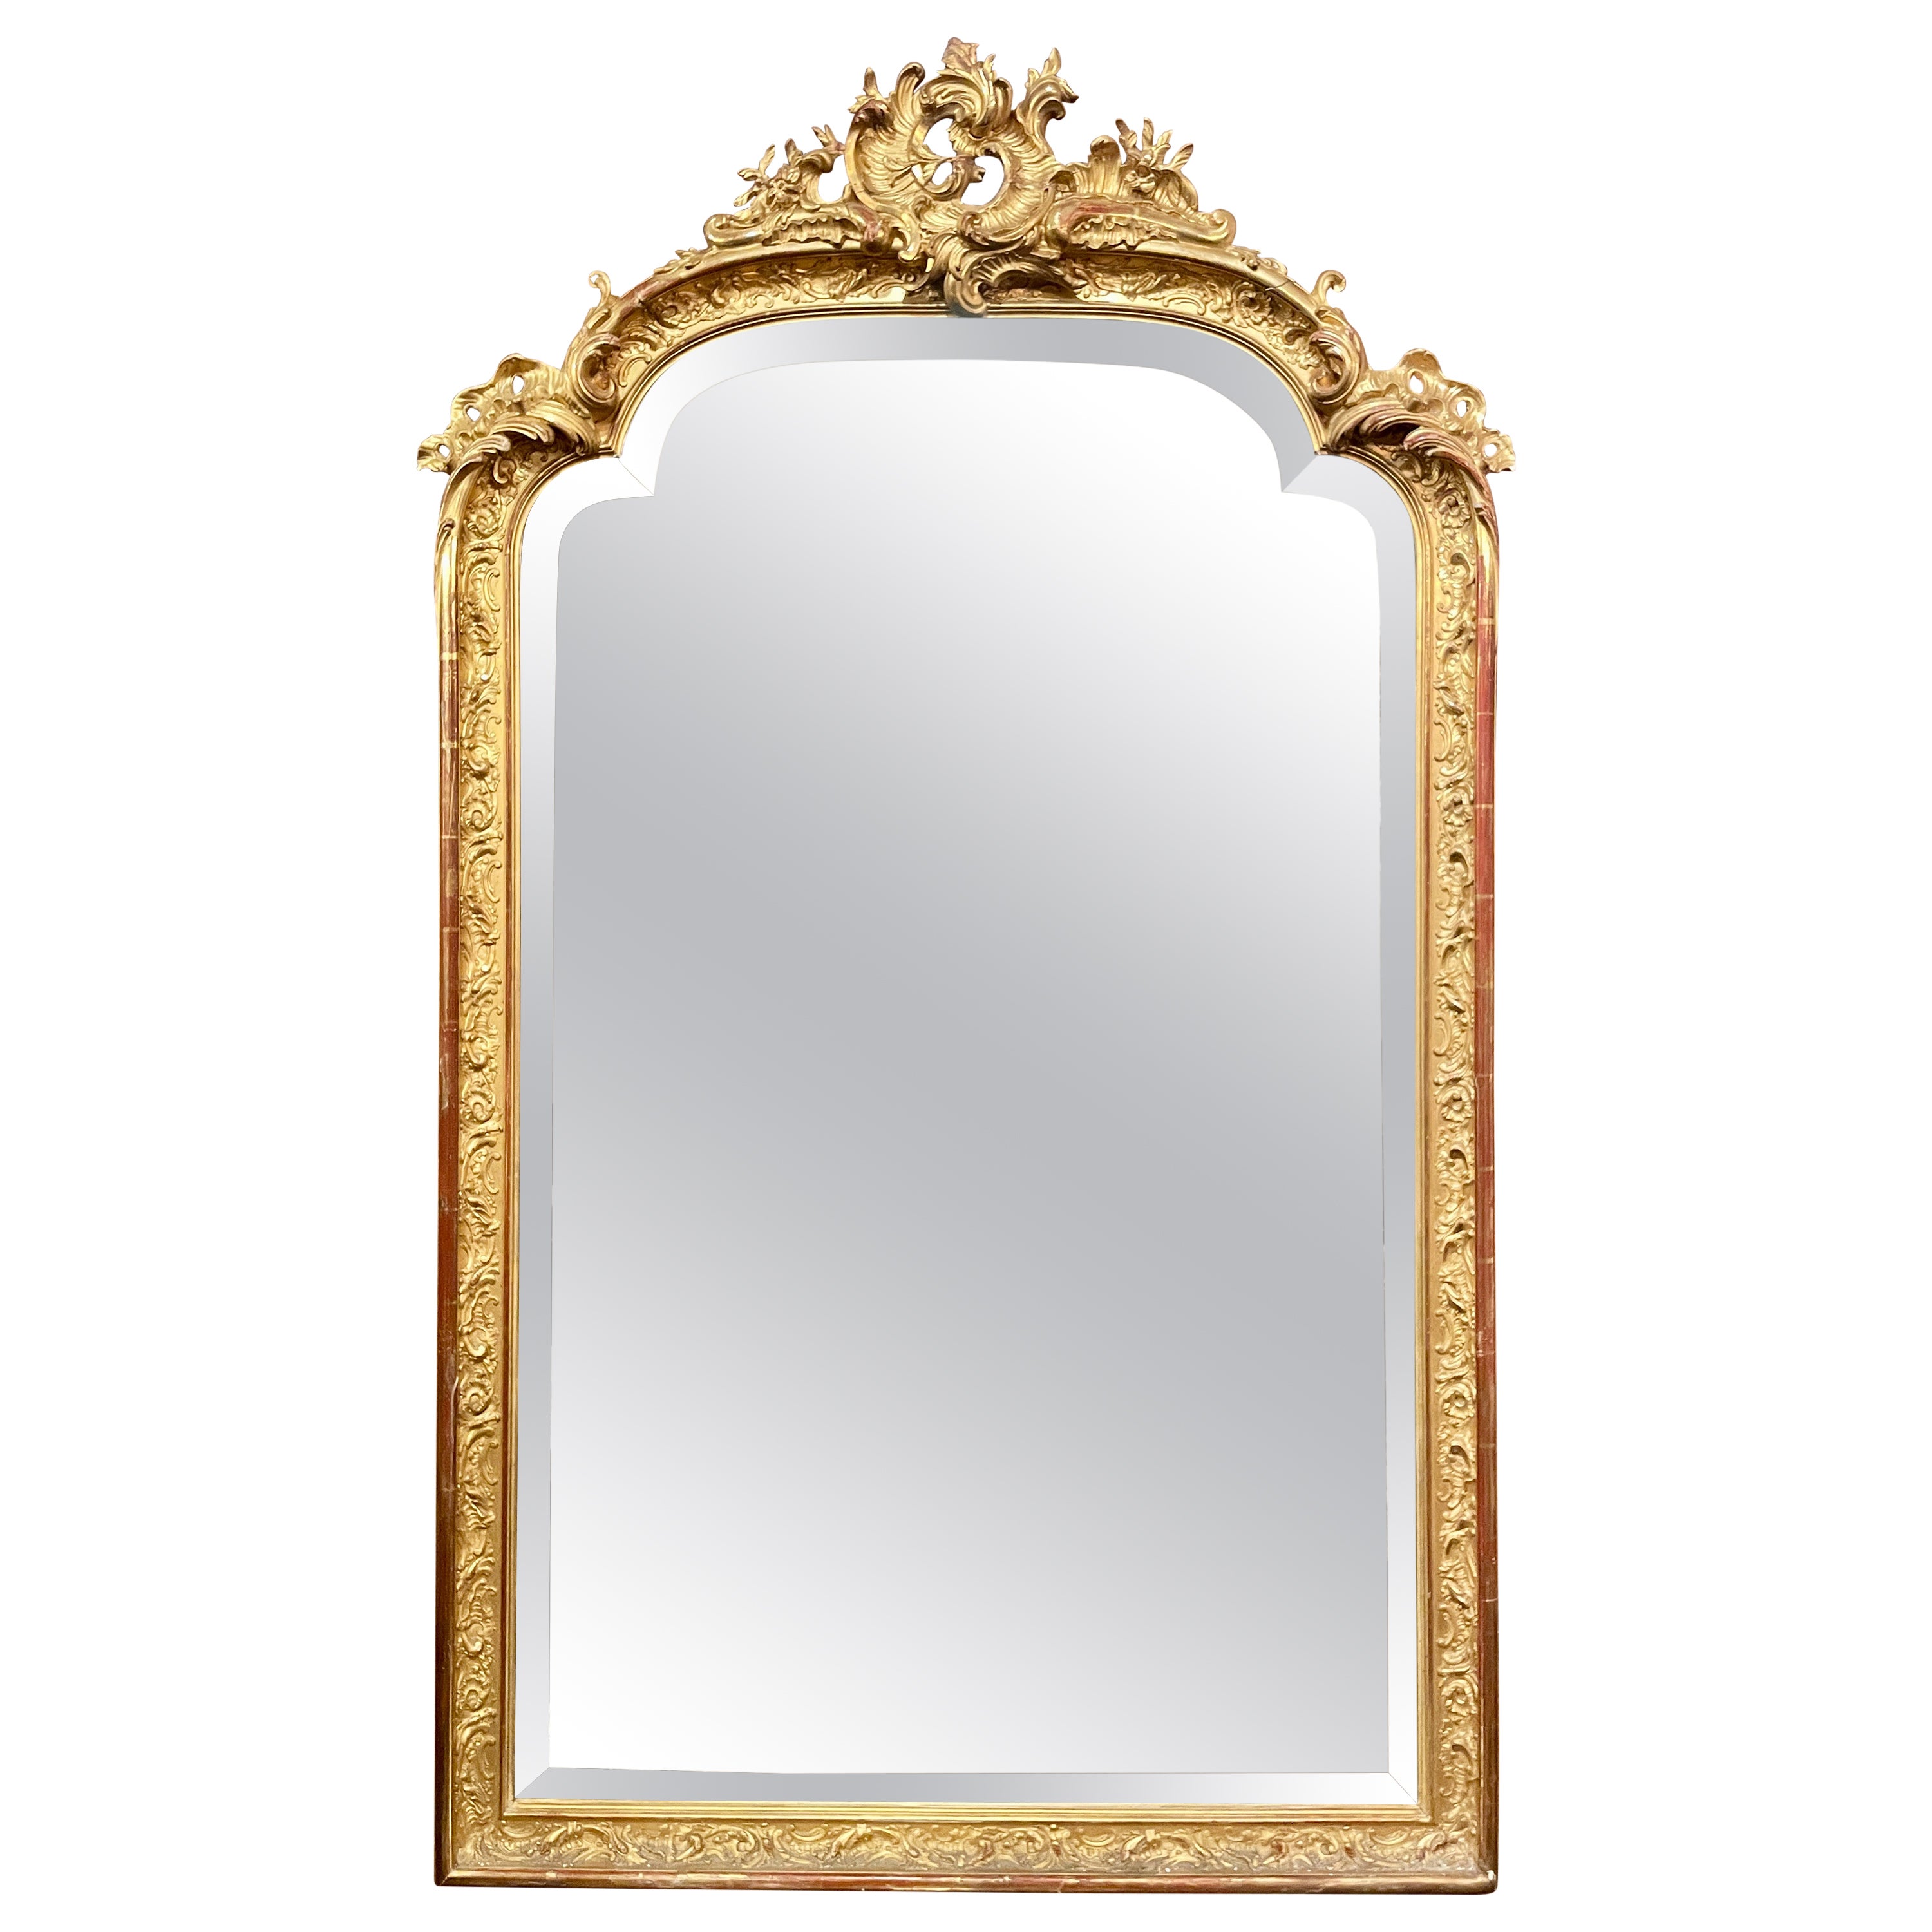 Antique French Napoleon III Gold Leaf Mirror with Beveling, Circa 1875-1885